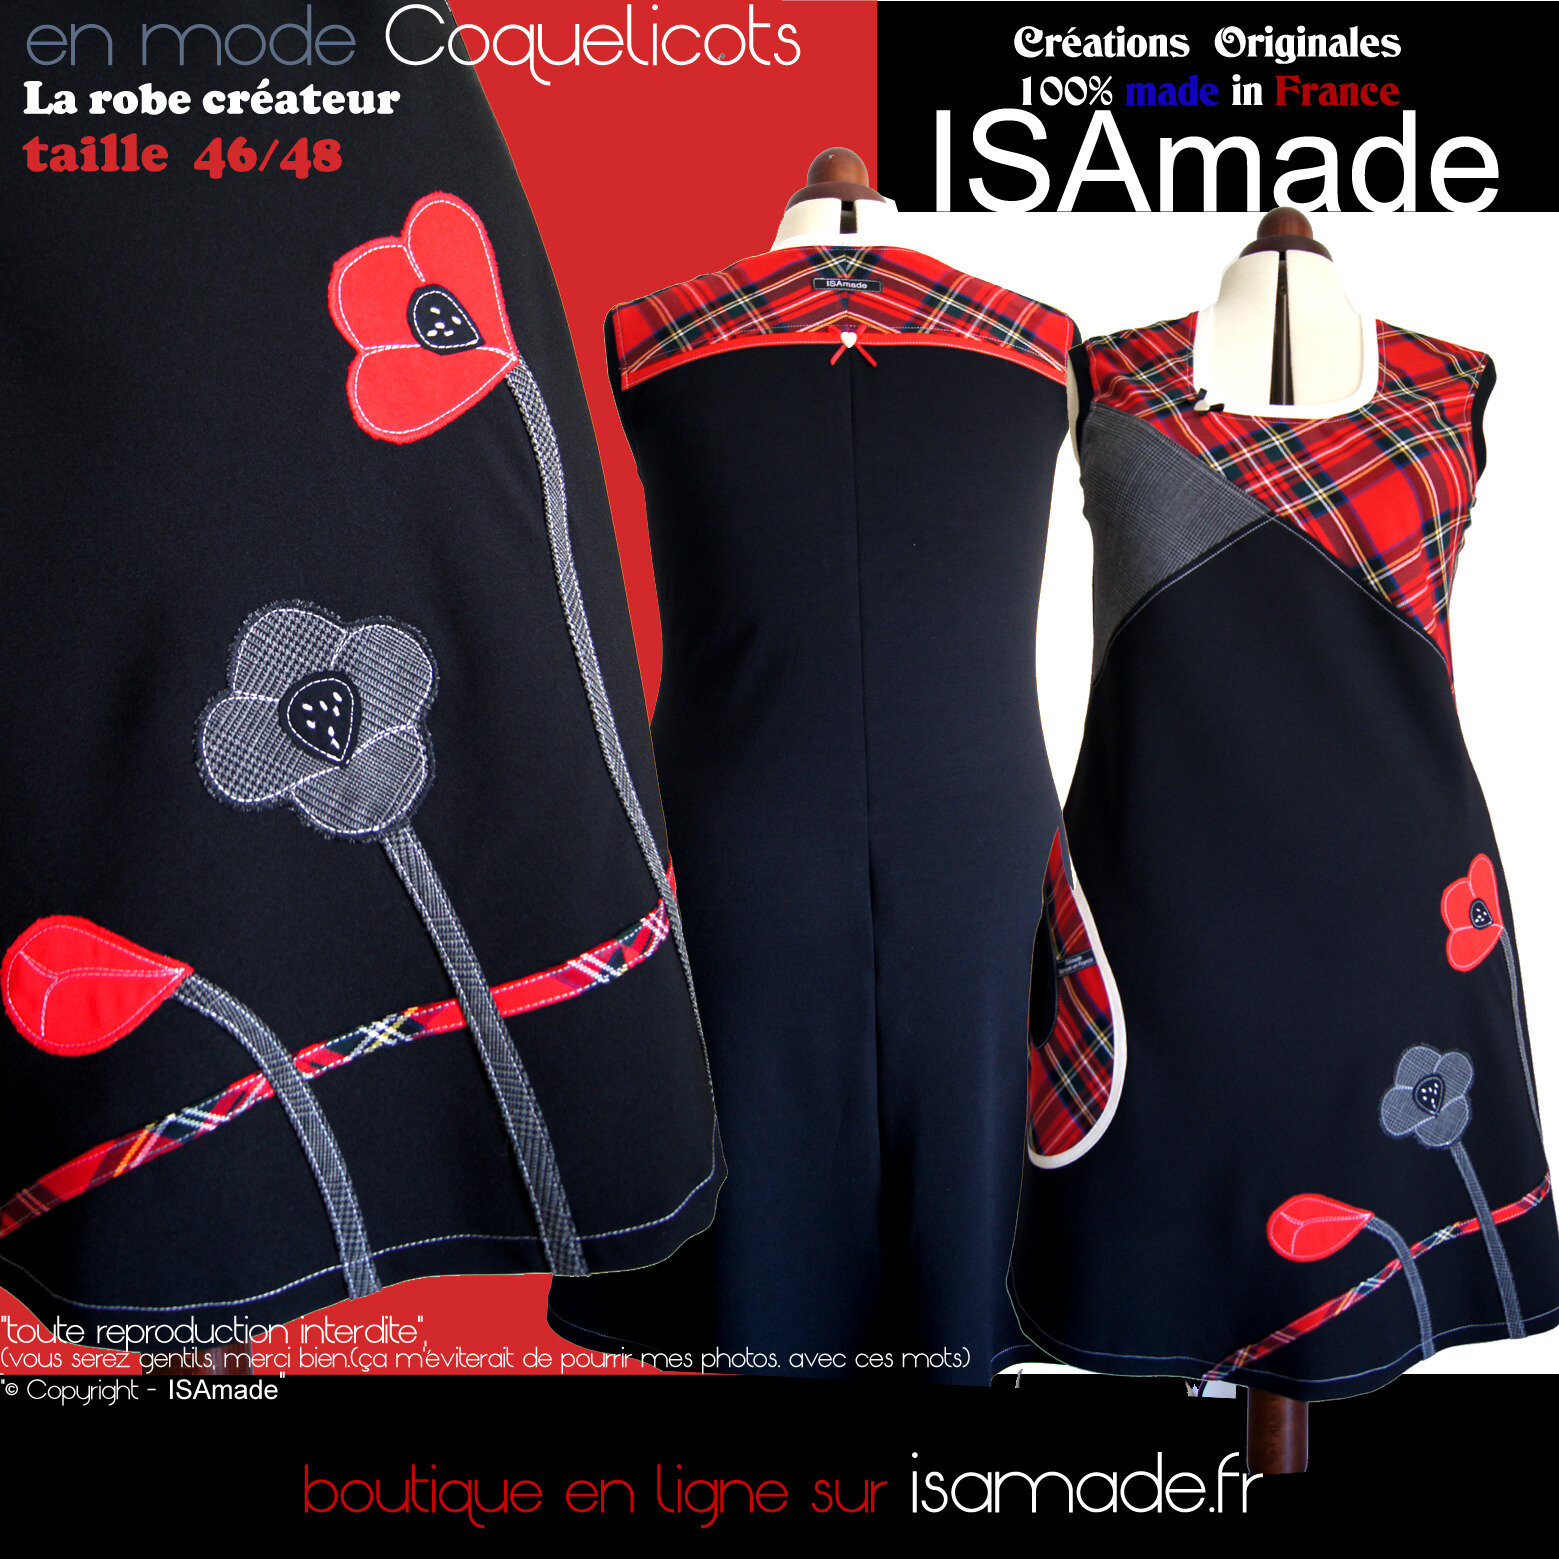 robe made in France coquelicots